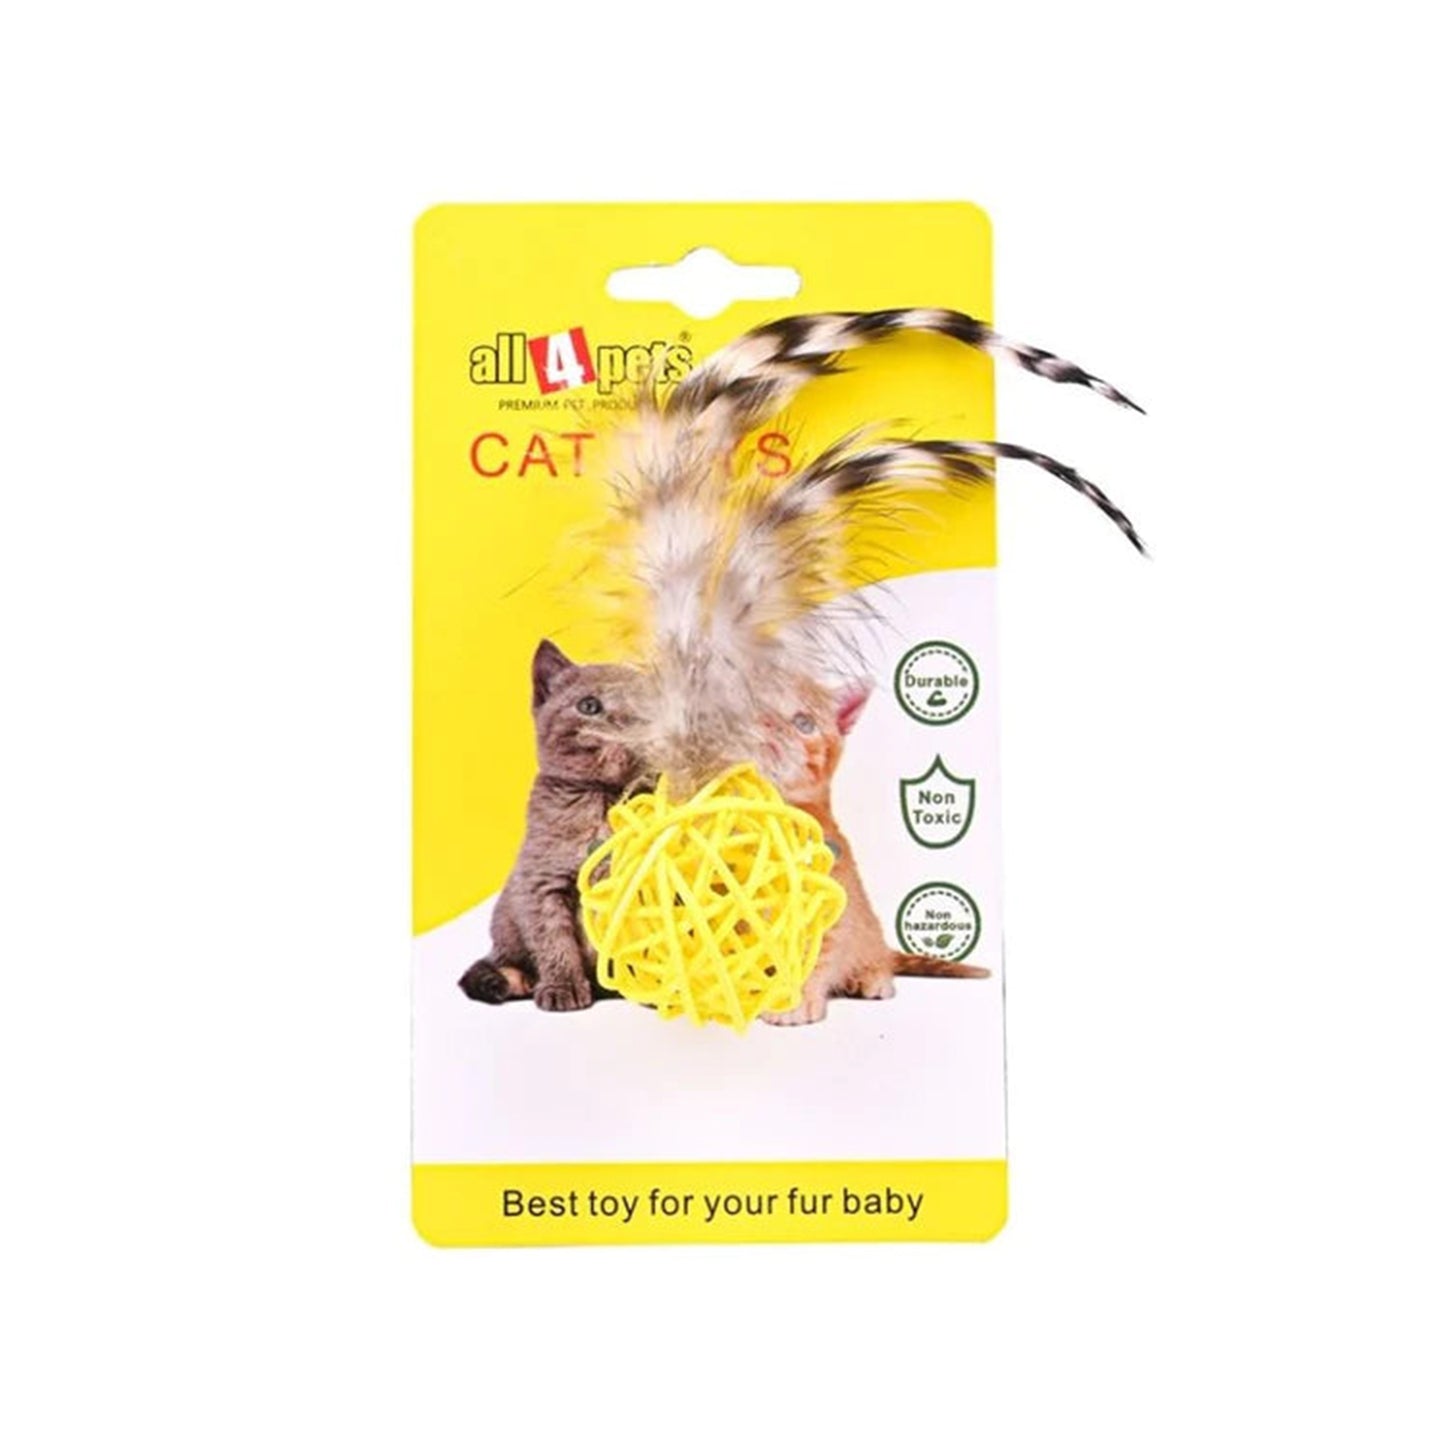 All4pets - Cat Toy with Feathers